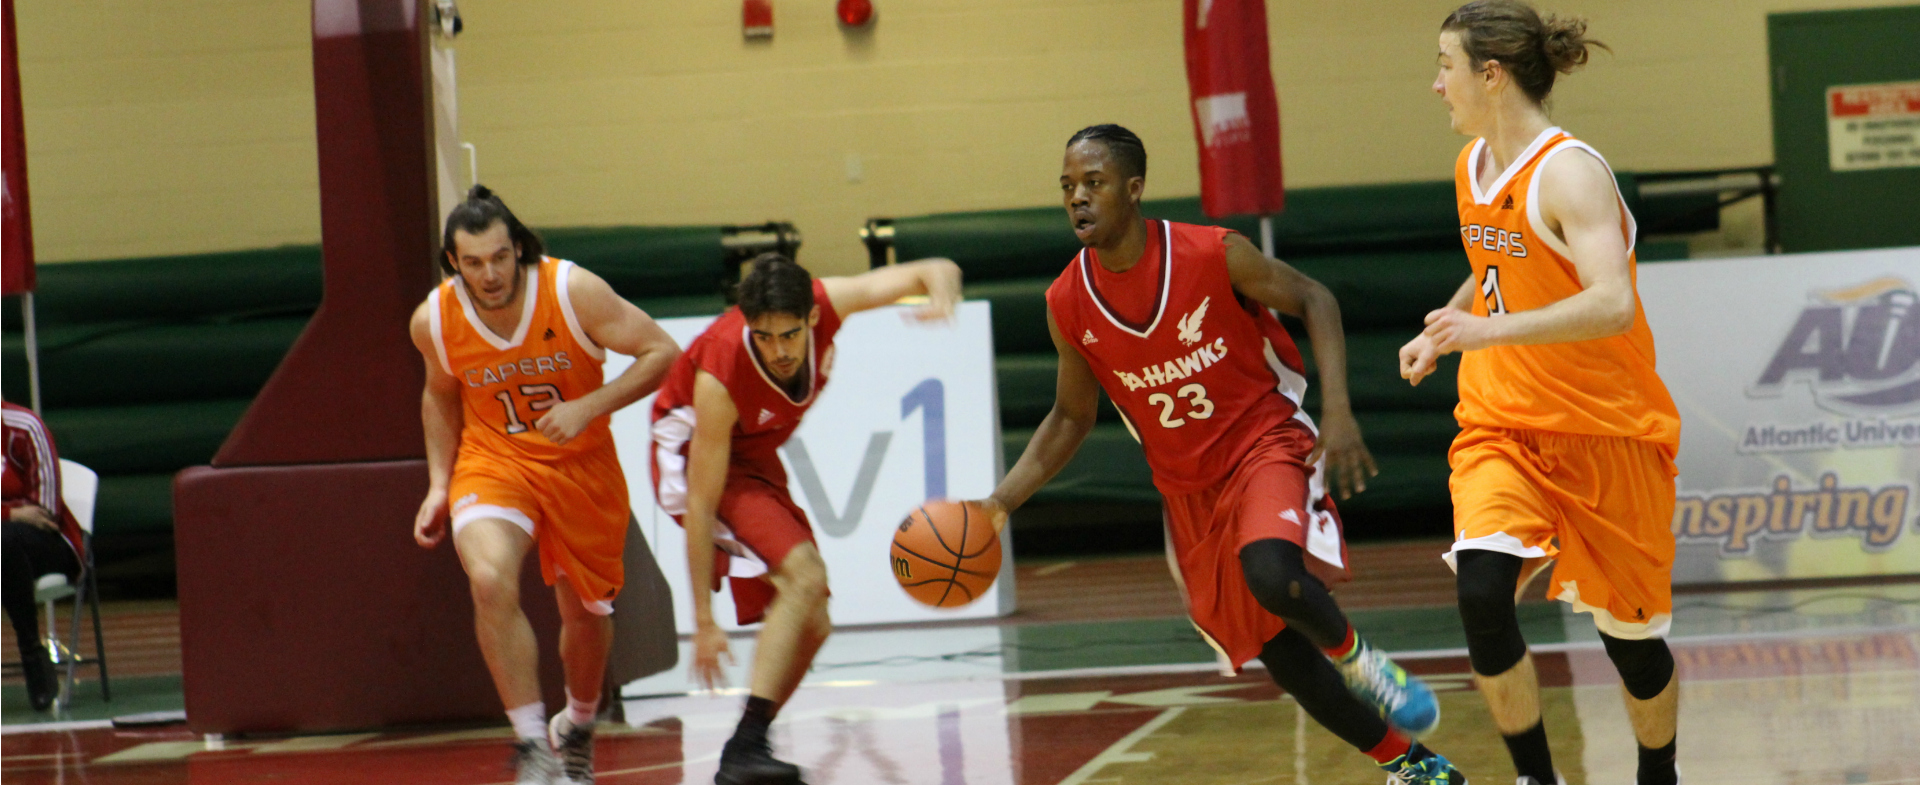 Sea-Hawks move into 1st place in AUS